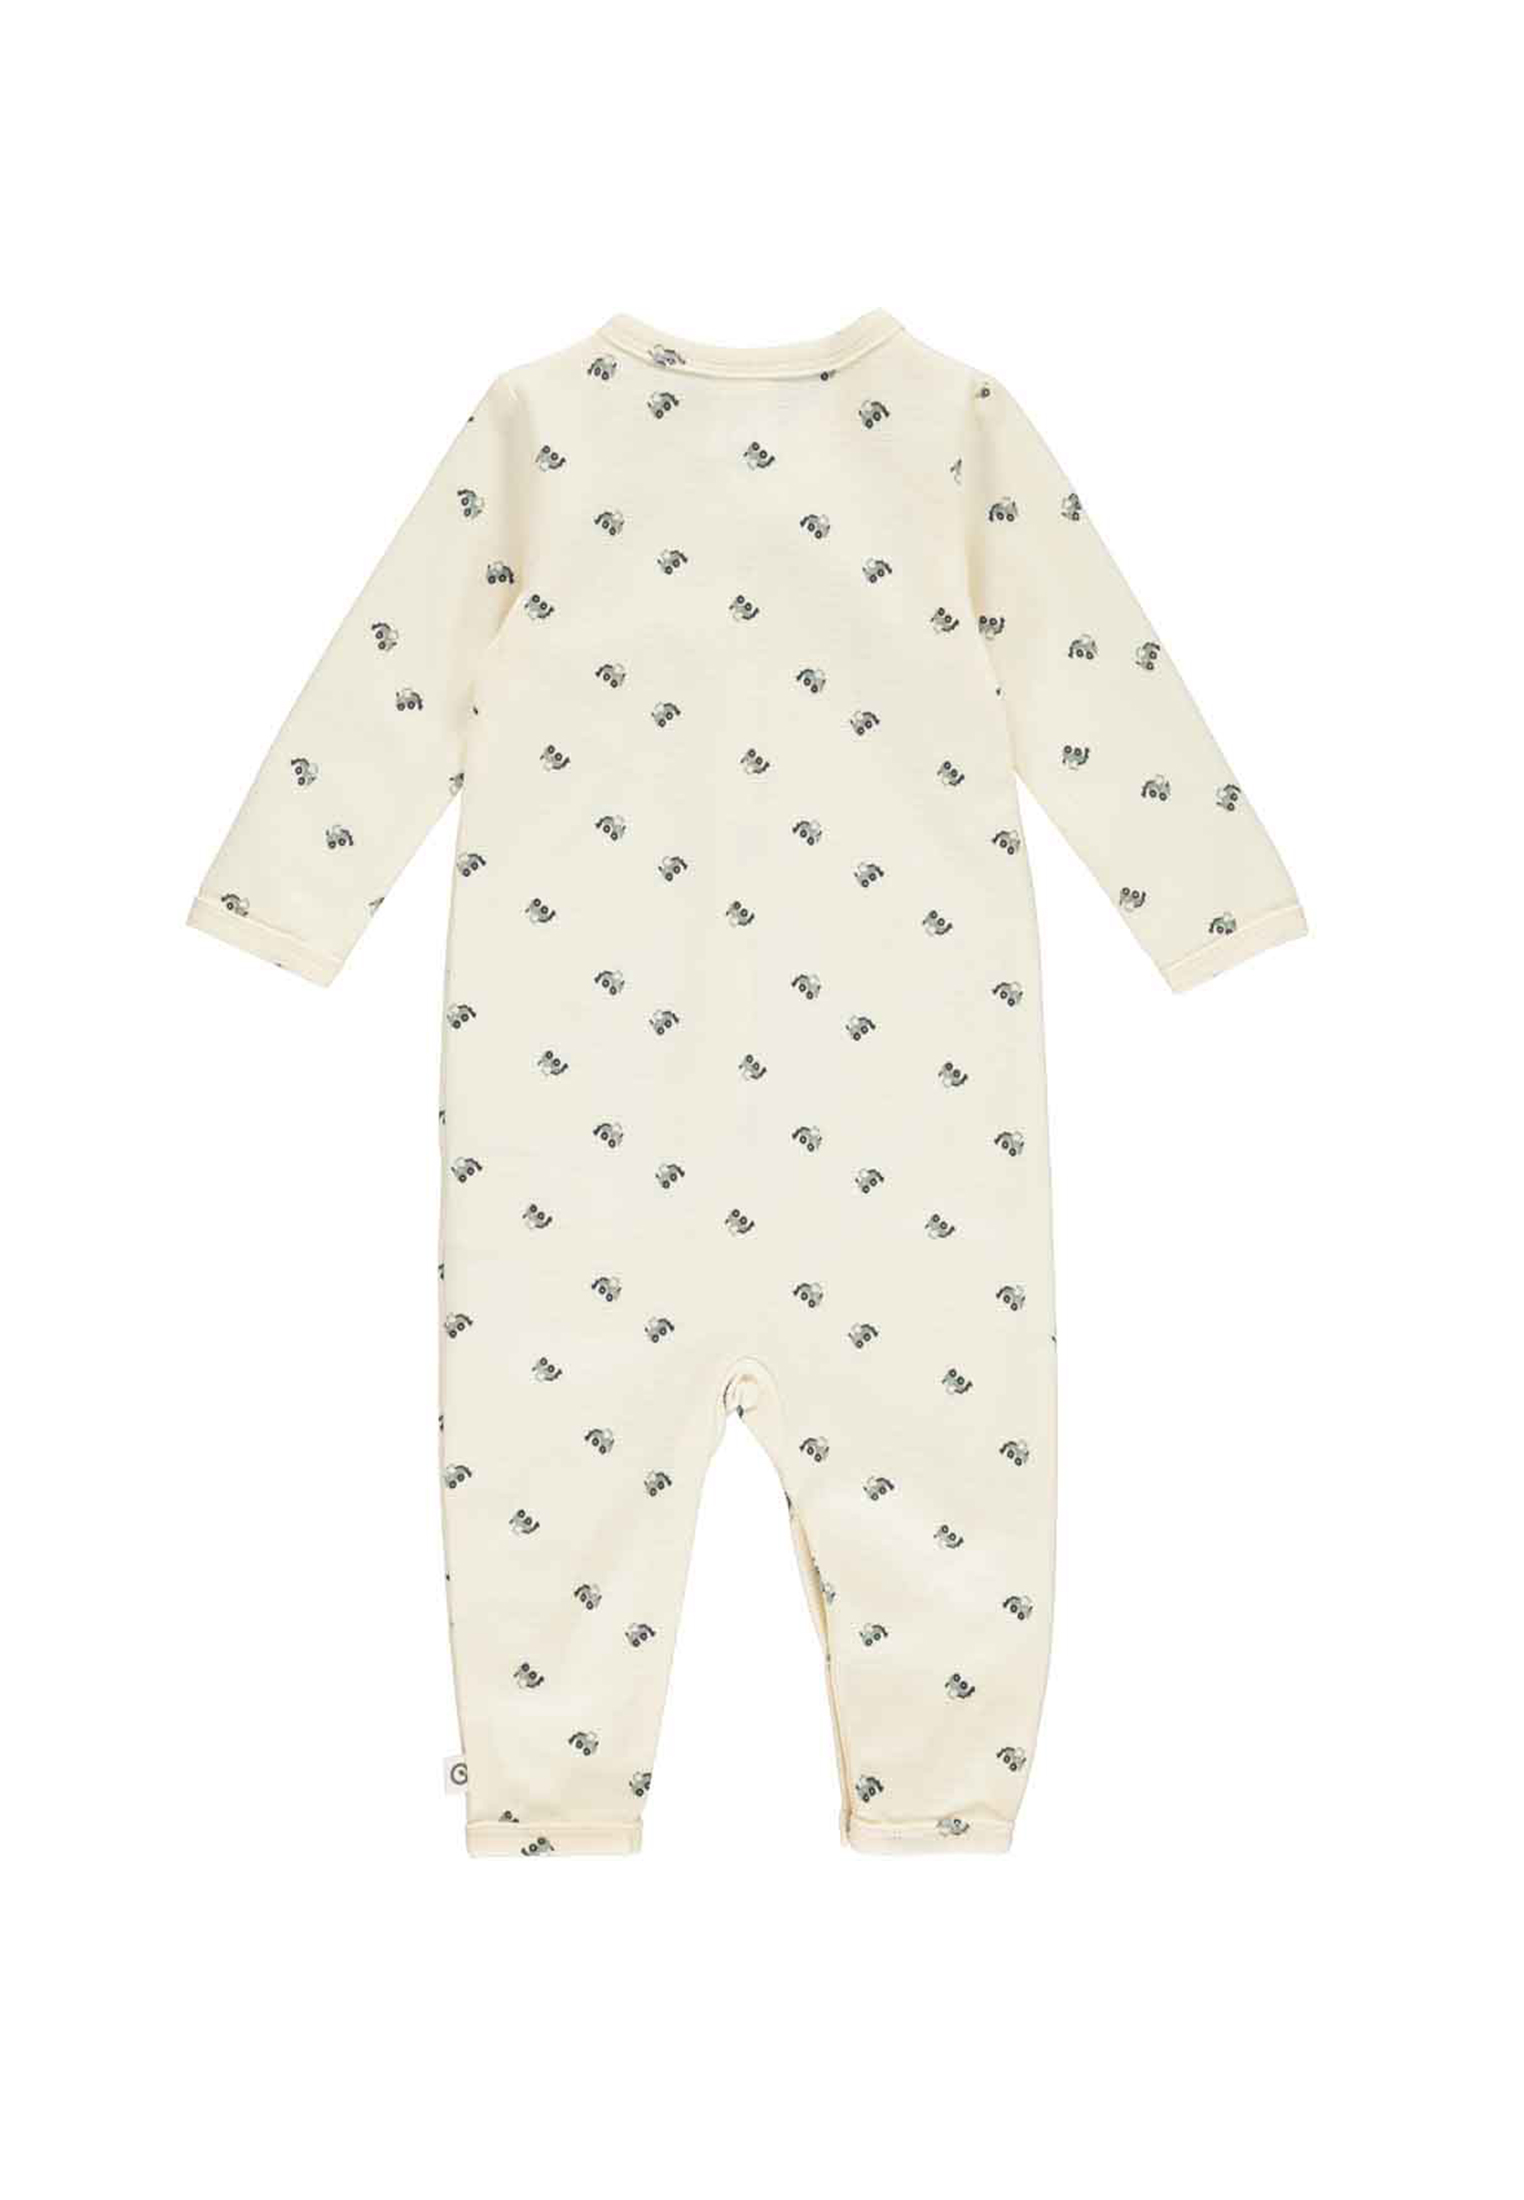 MAMA.LICIOUS Baby one-piece suit -Buttercream/Green - 1584061300